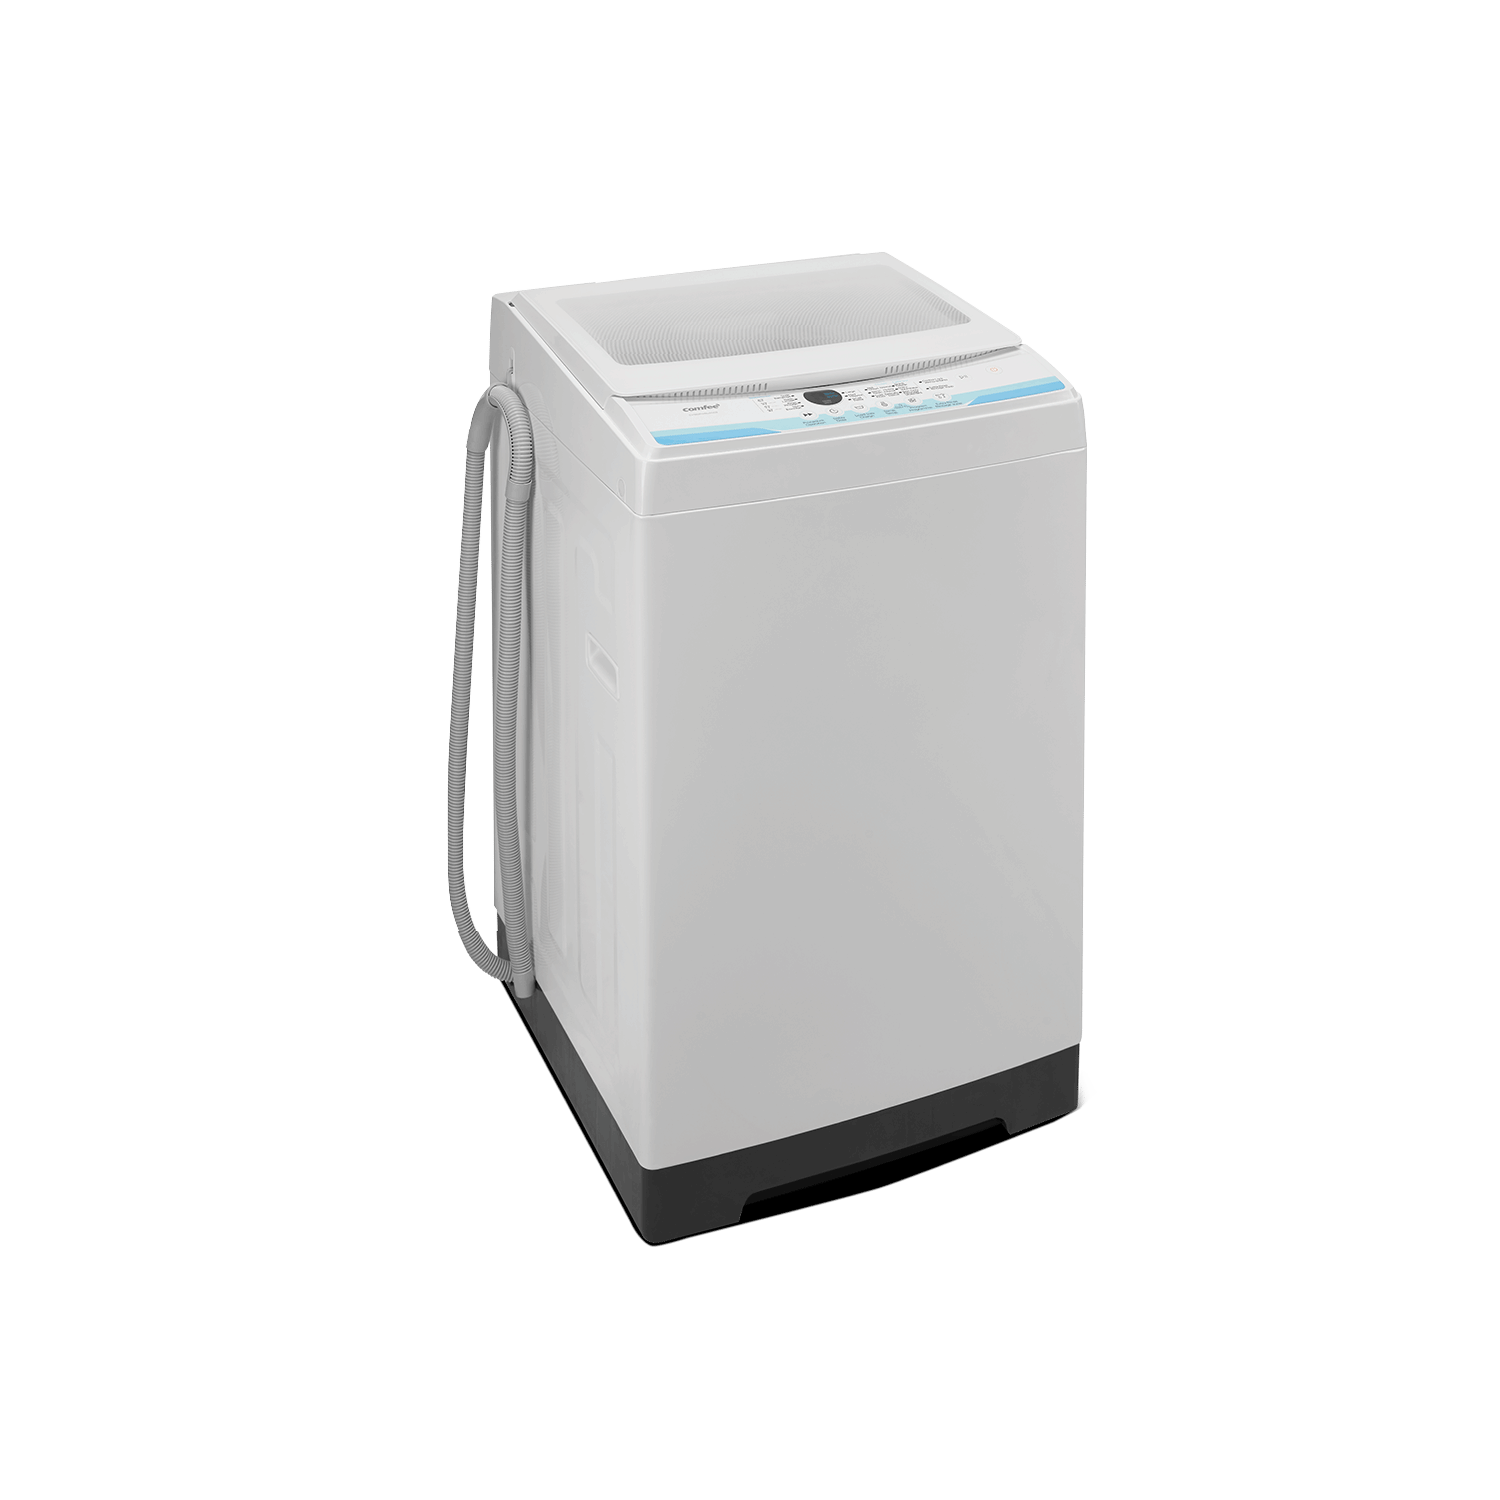 Title: The COMFEE' 1.8 Cu. ft. LED Portable Washing Machine Will Transform  Your Laundry Routine, by Products Showcase, Oct, 2023